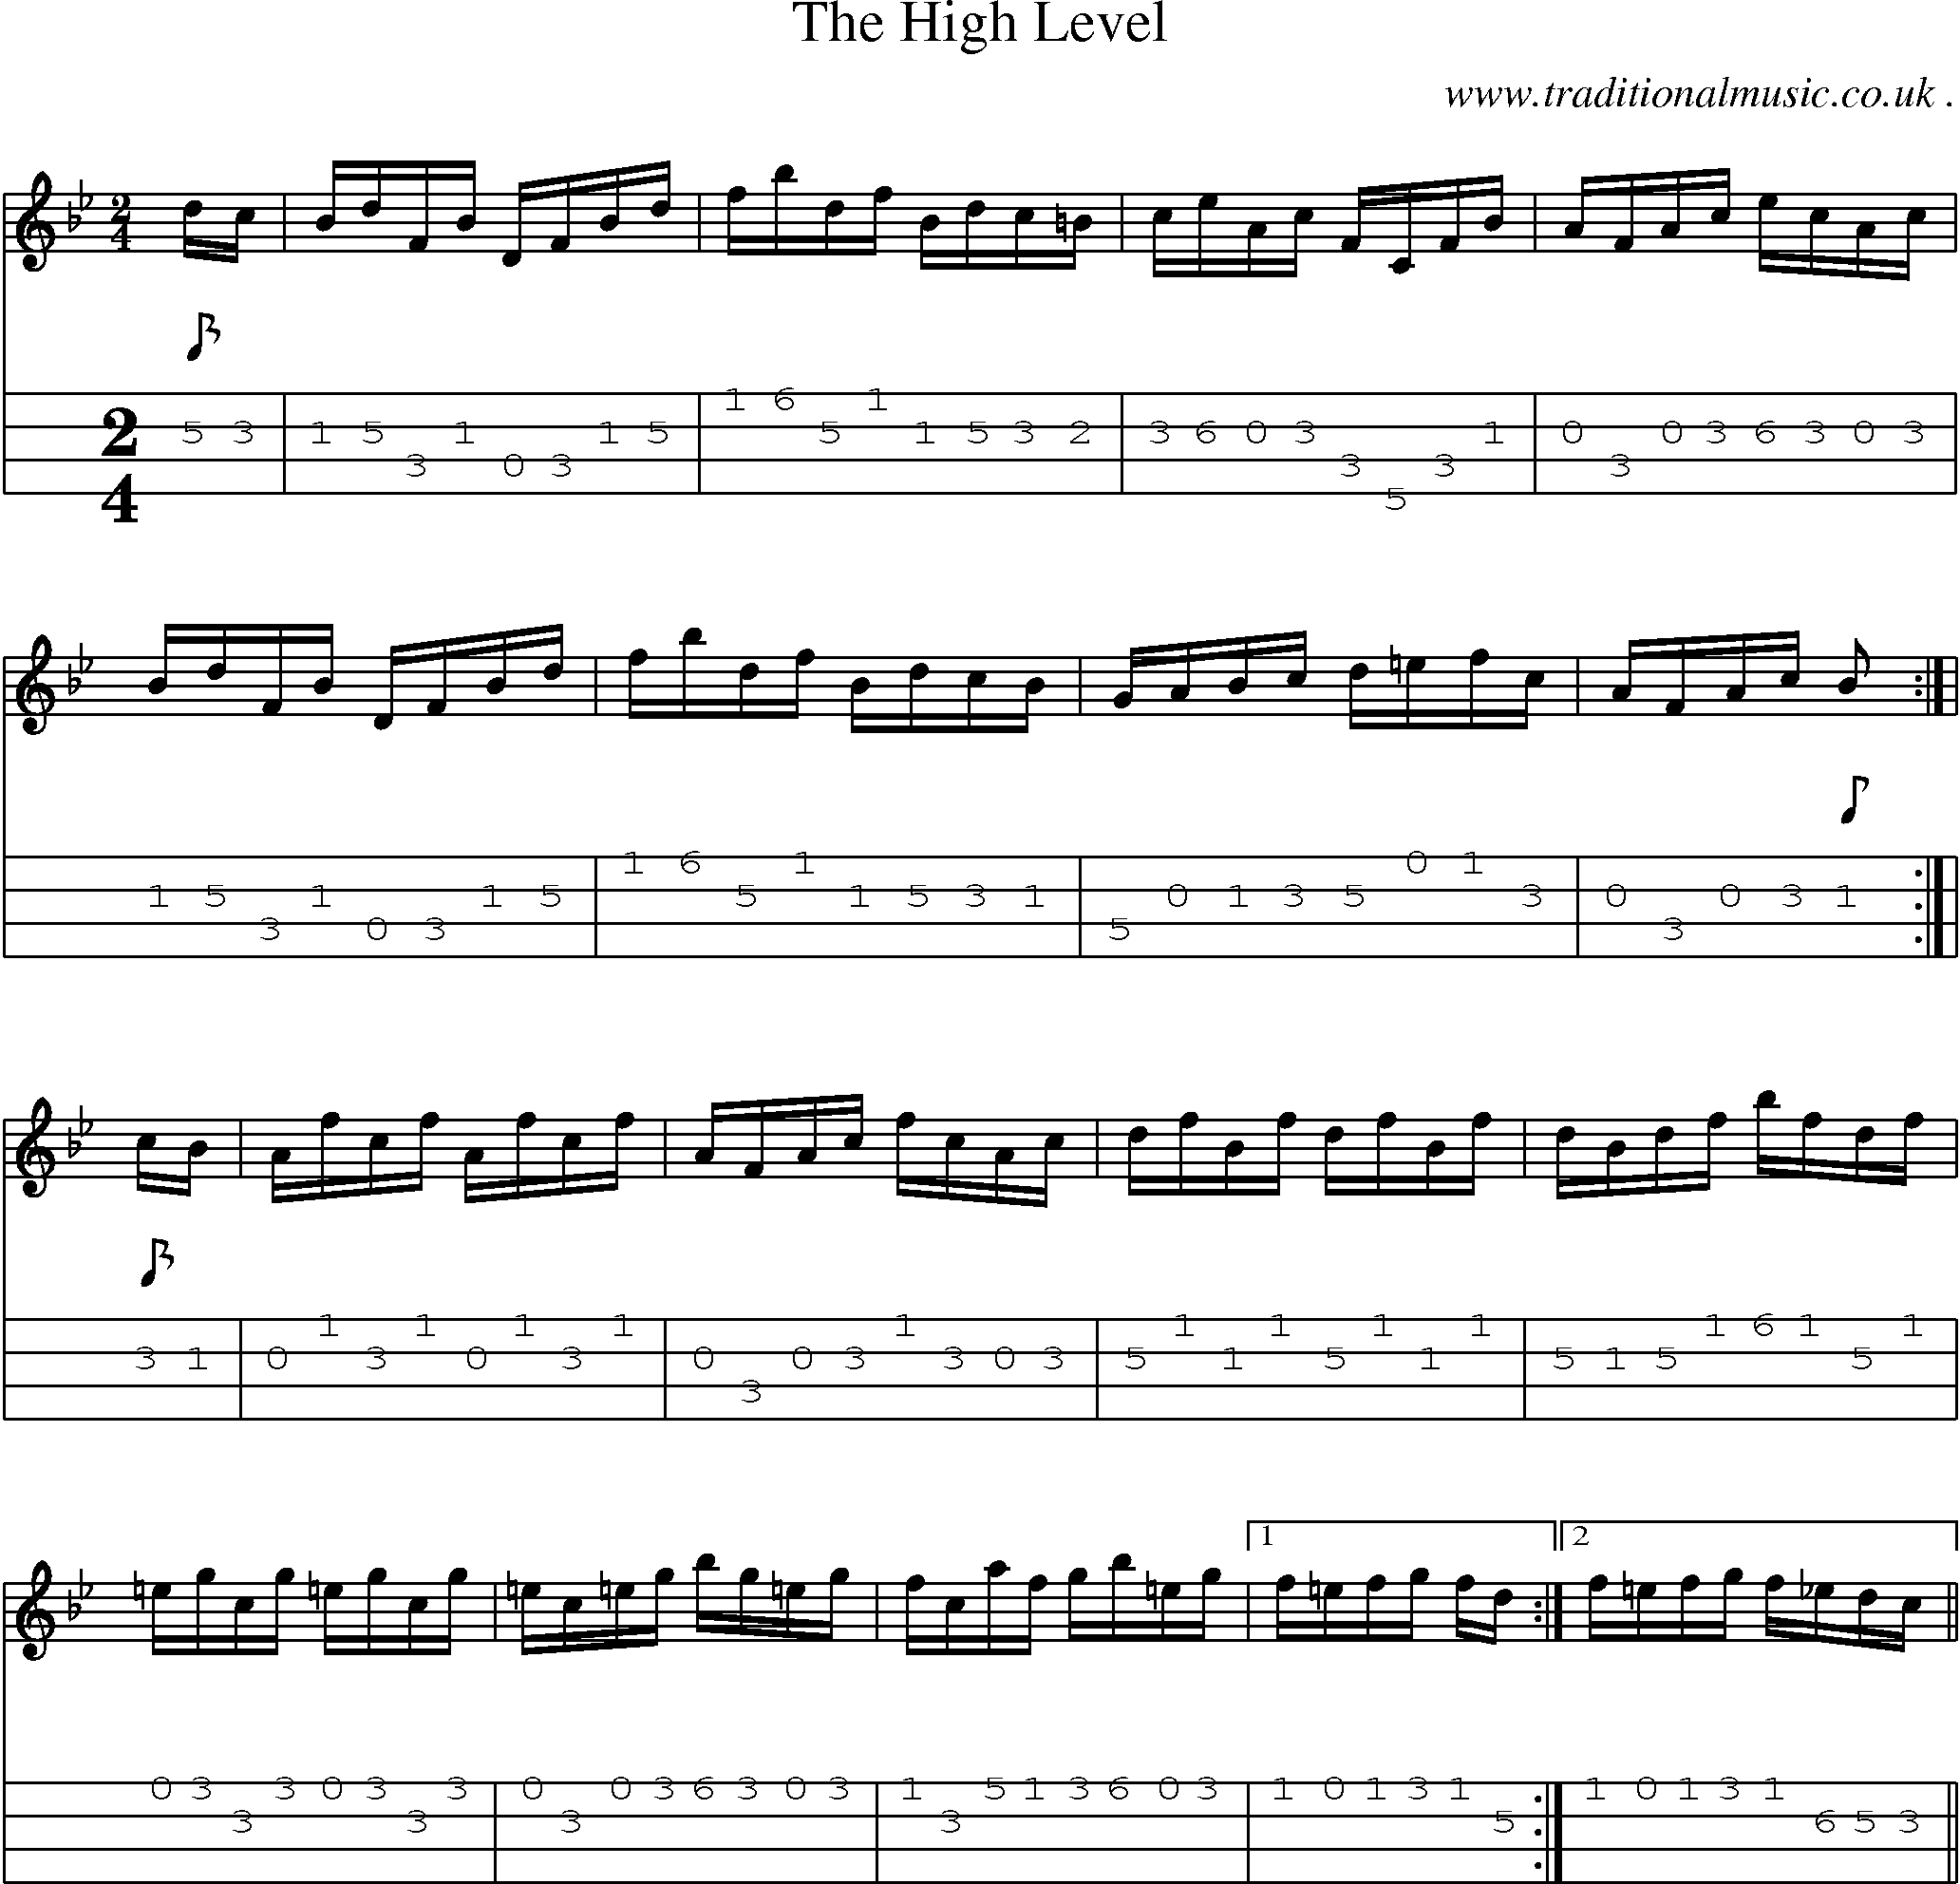 Music Score and Guitar Tabs for The High Level